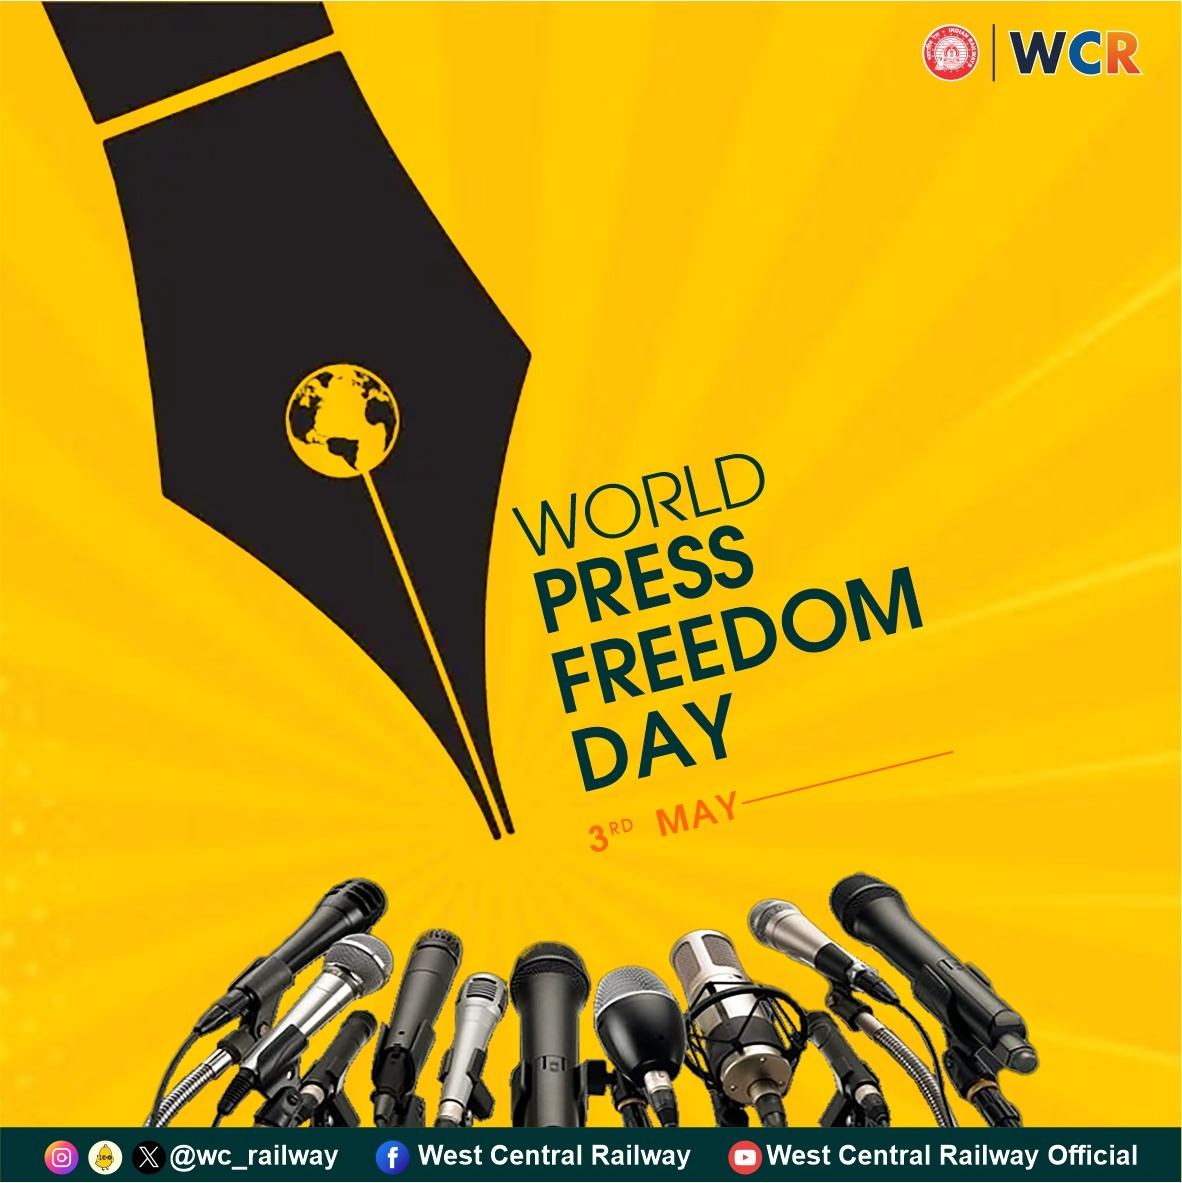 'Today, we celebrate  #WorldPressFreedomDay, honoring the vital role of a free press in democracy. Let's reaffirm our commitment to defending journalists' rights to report truth without fear or censorship.' 
✊ #PressFreedom #JournalismMatters